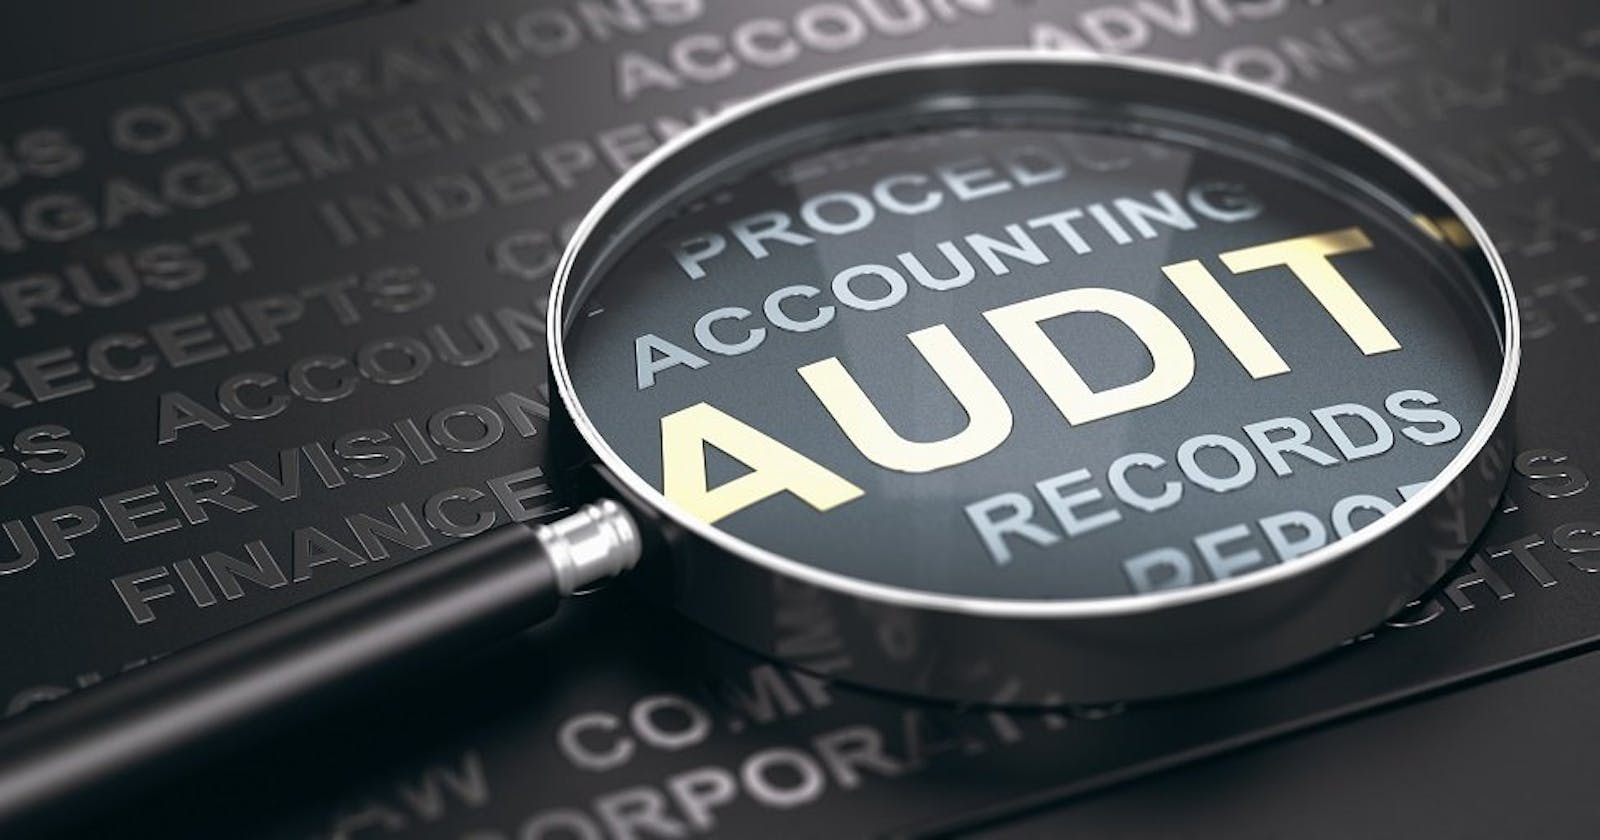 How to implement audit logging in our application